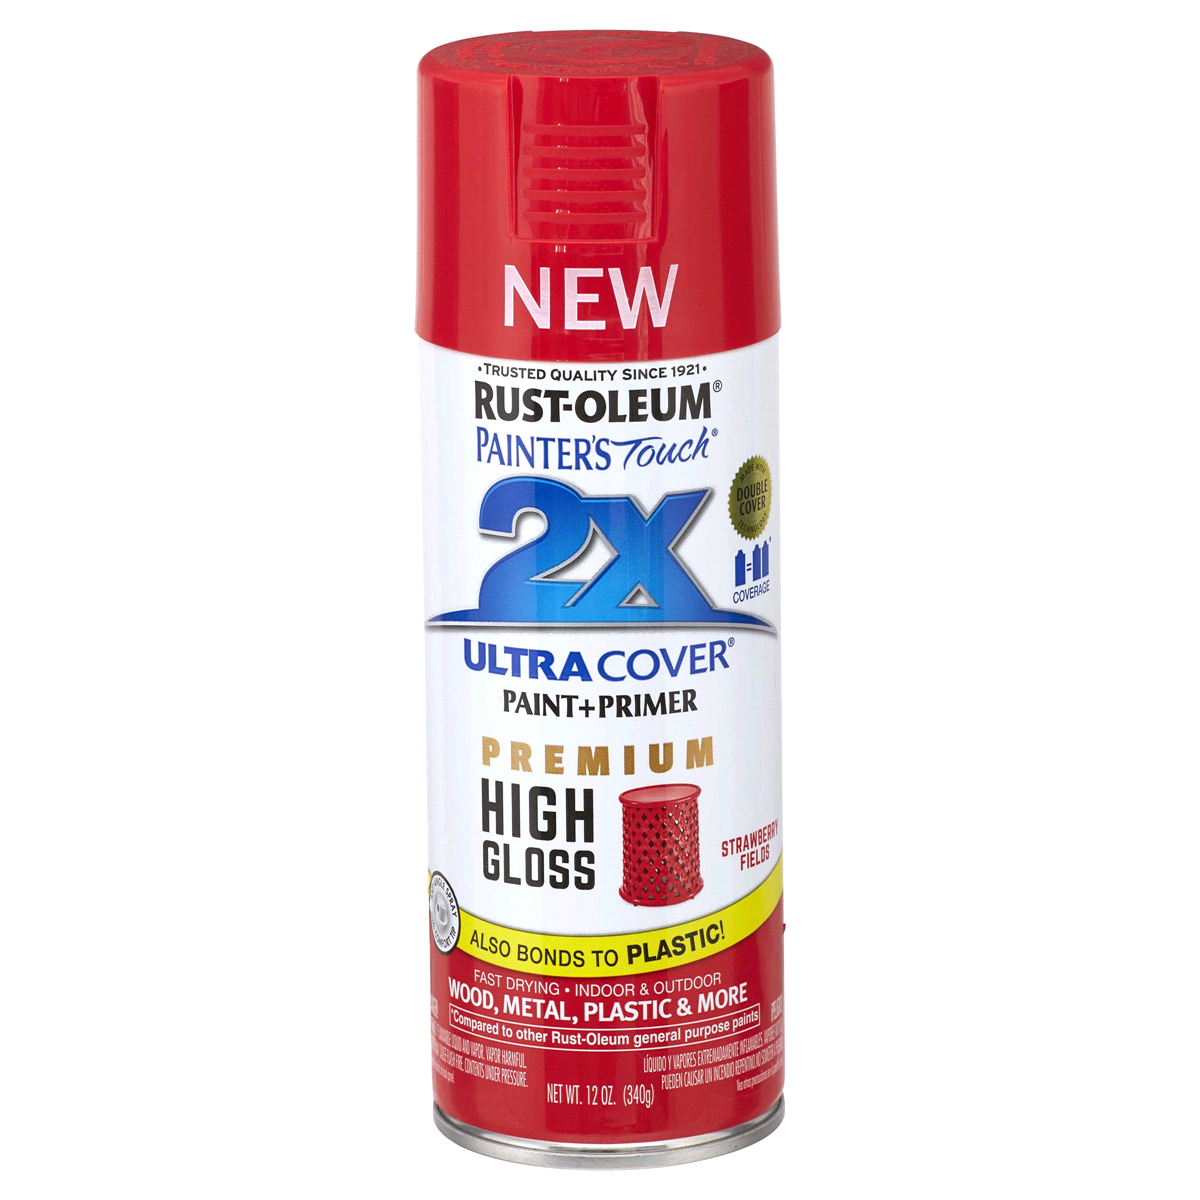 slide 1 of 3, Rust-Oleum Painters Touch 2x Ultra Cover Spray Paint 331180, High Gloss Strawberry Field, 12 oz